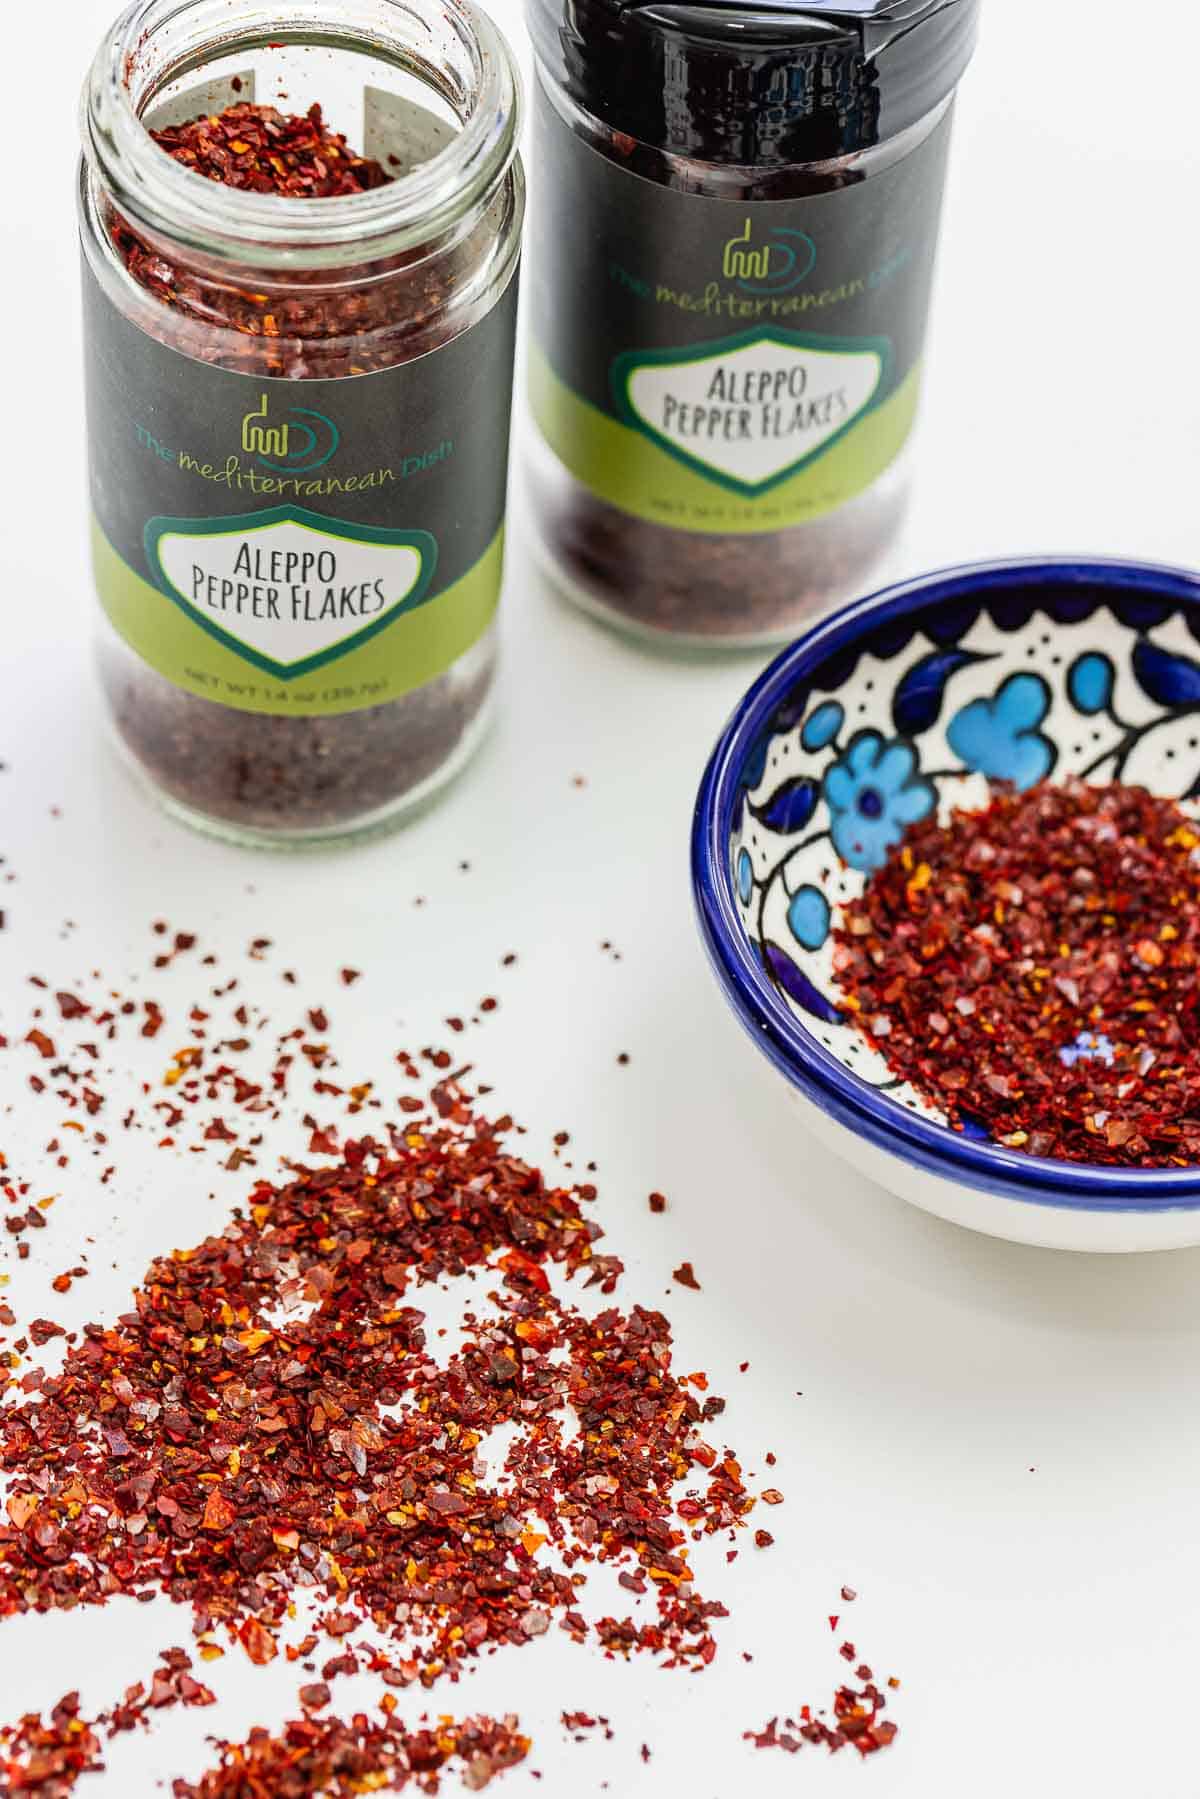 Two bottles of the Mediterranean Dish Aleppo Pepper Flakes, as well as some in a small bowl, and some sprinkled on a white surface.